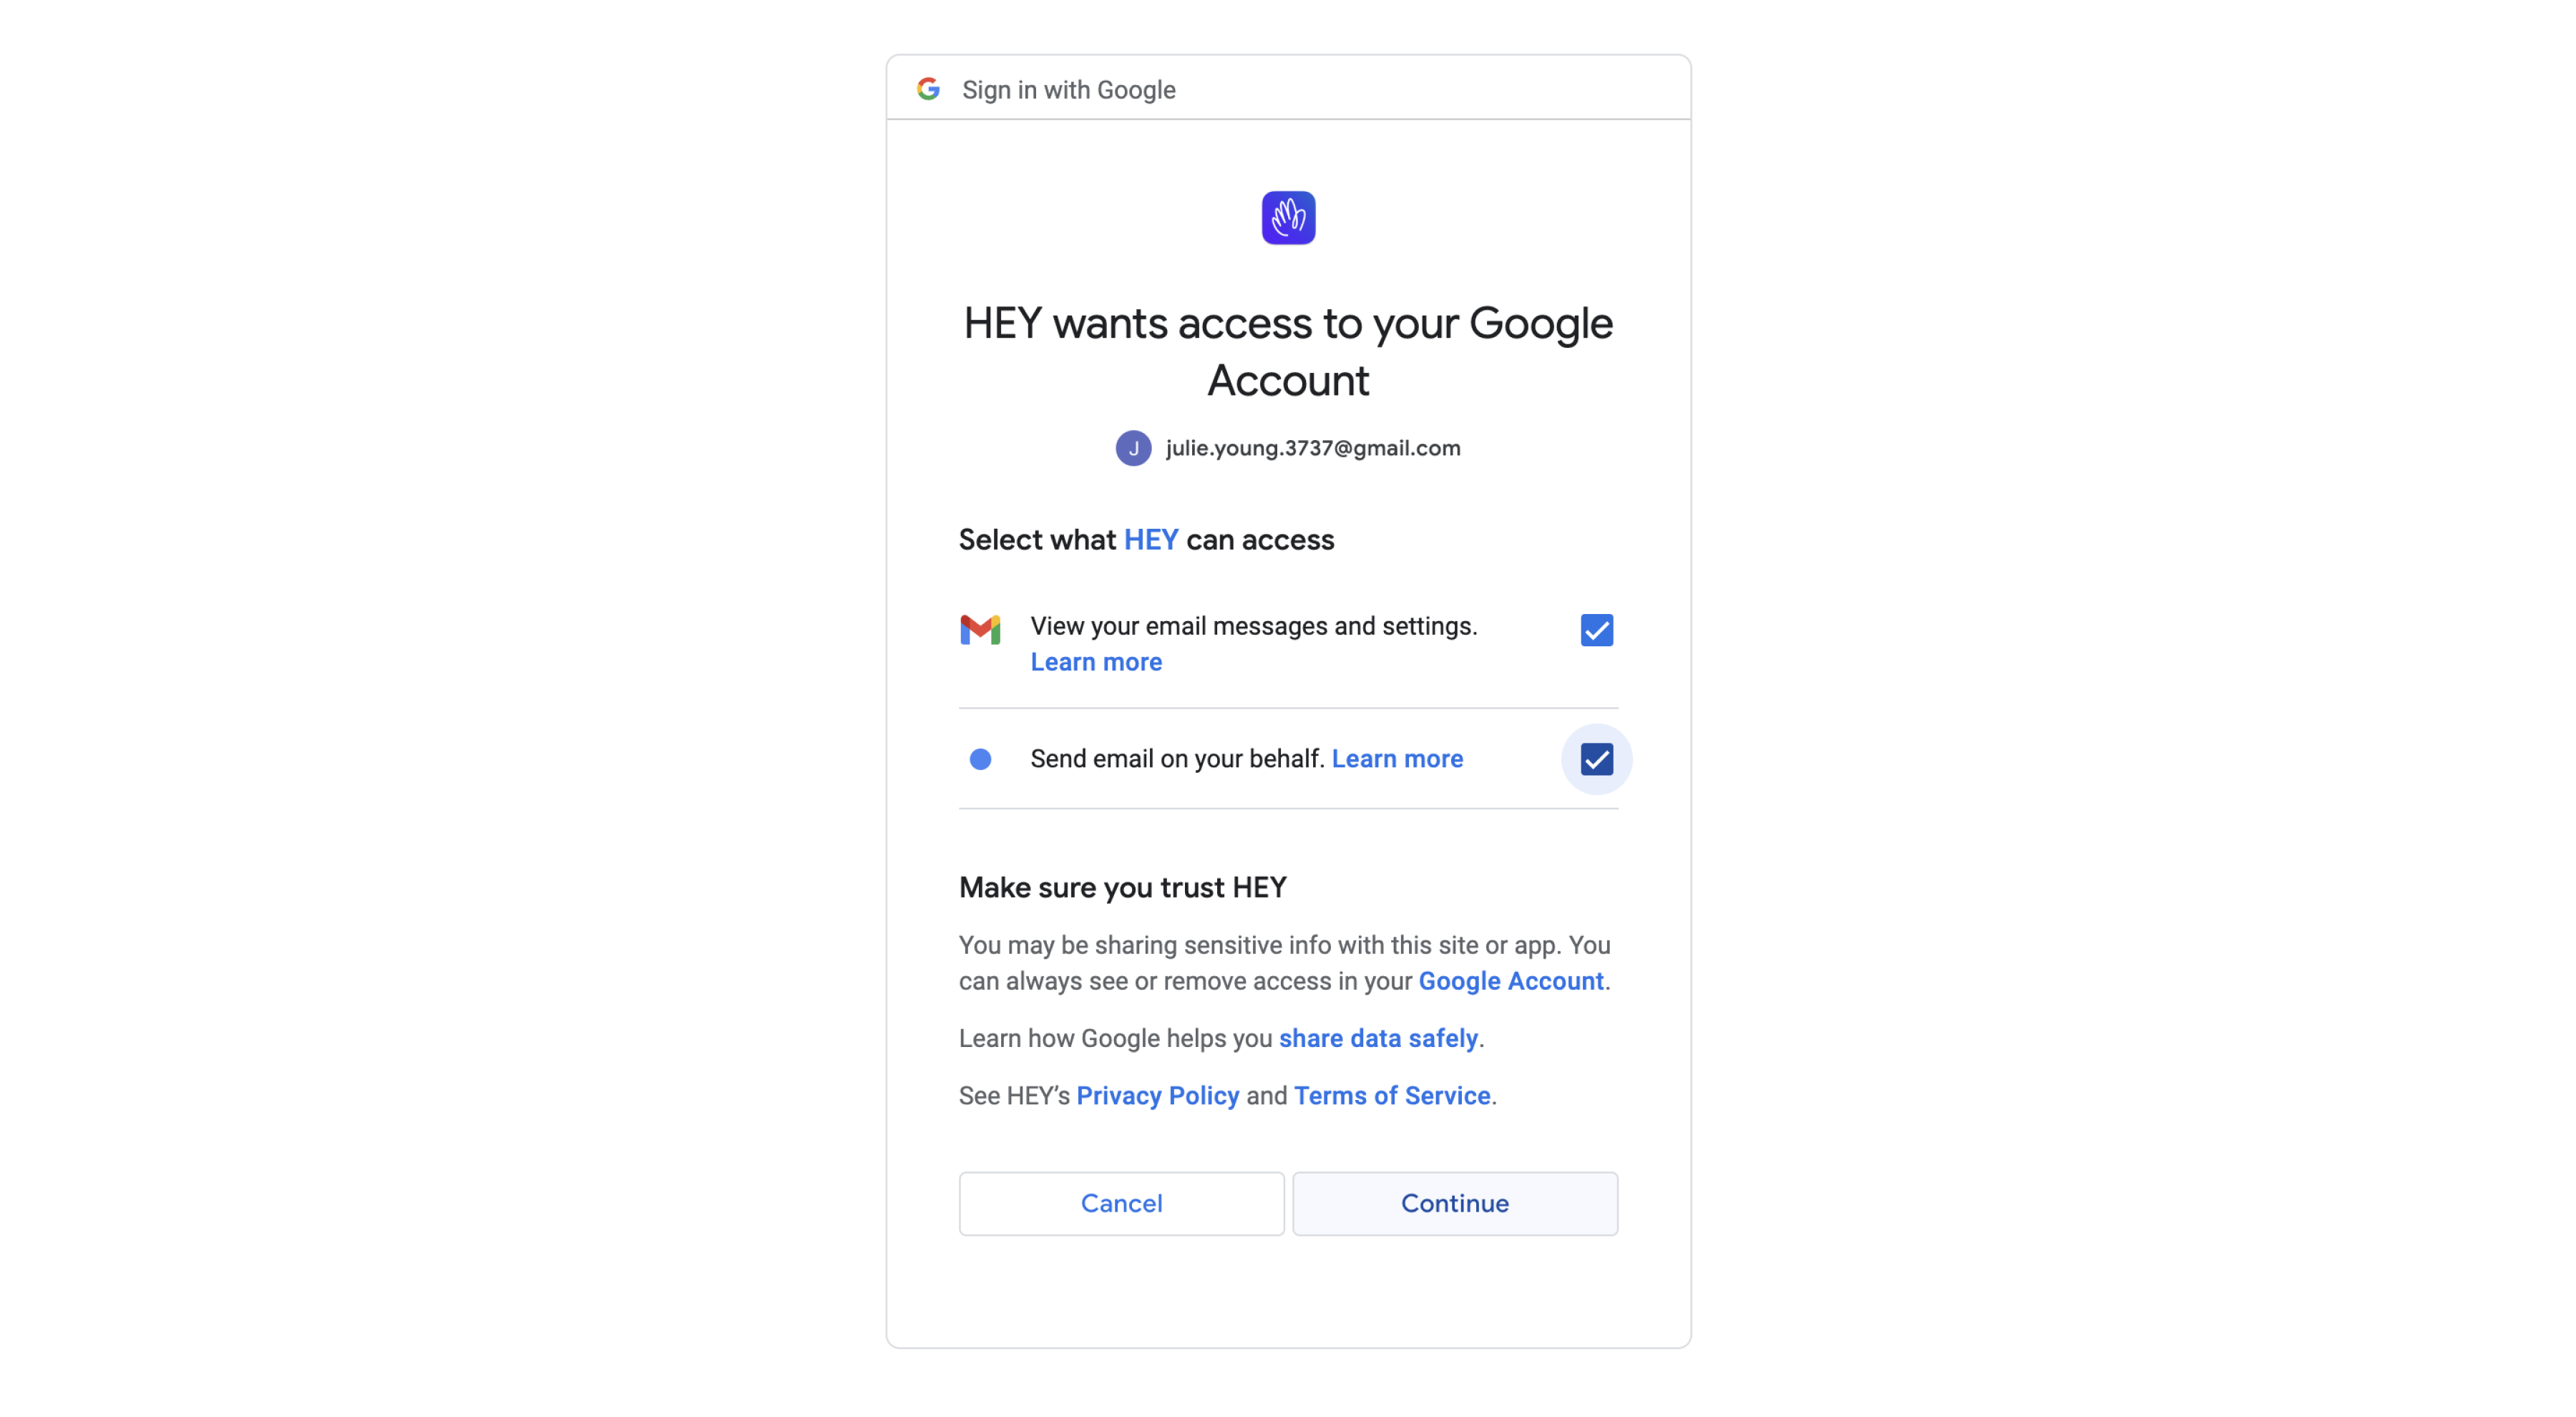 Allowing HEY access to send from your Google account